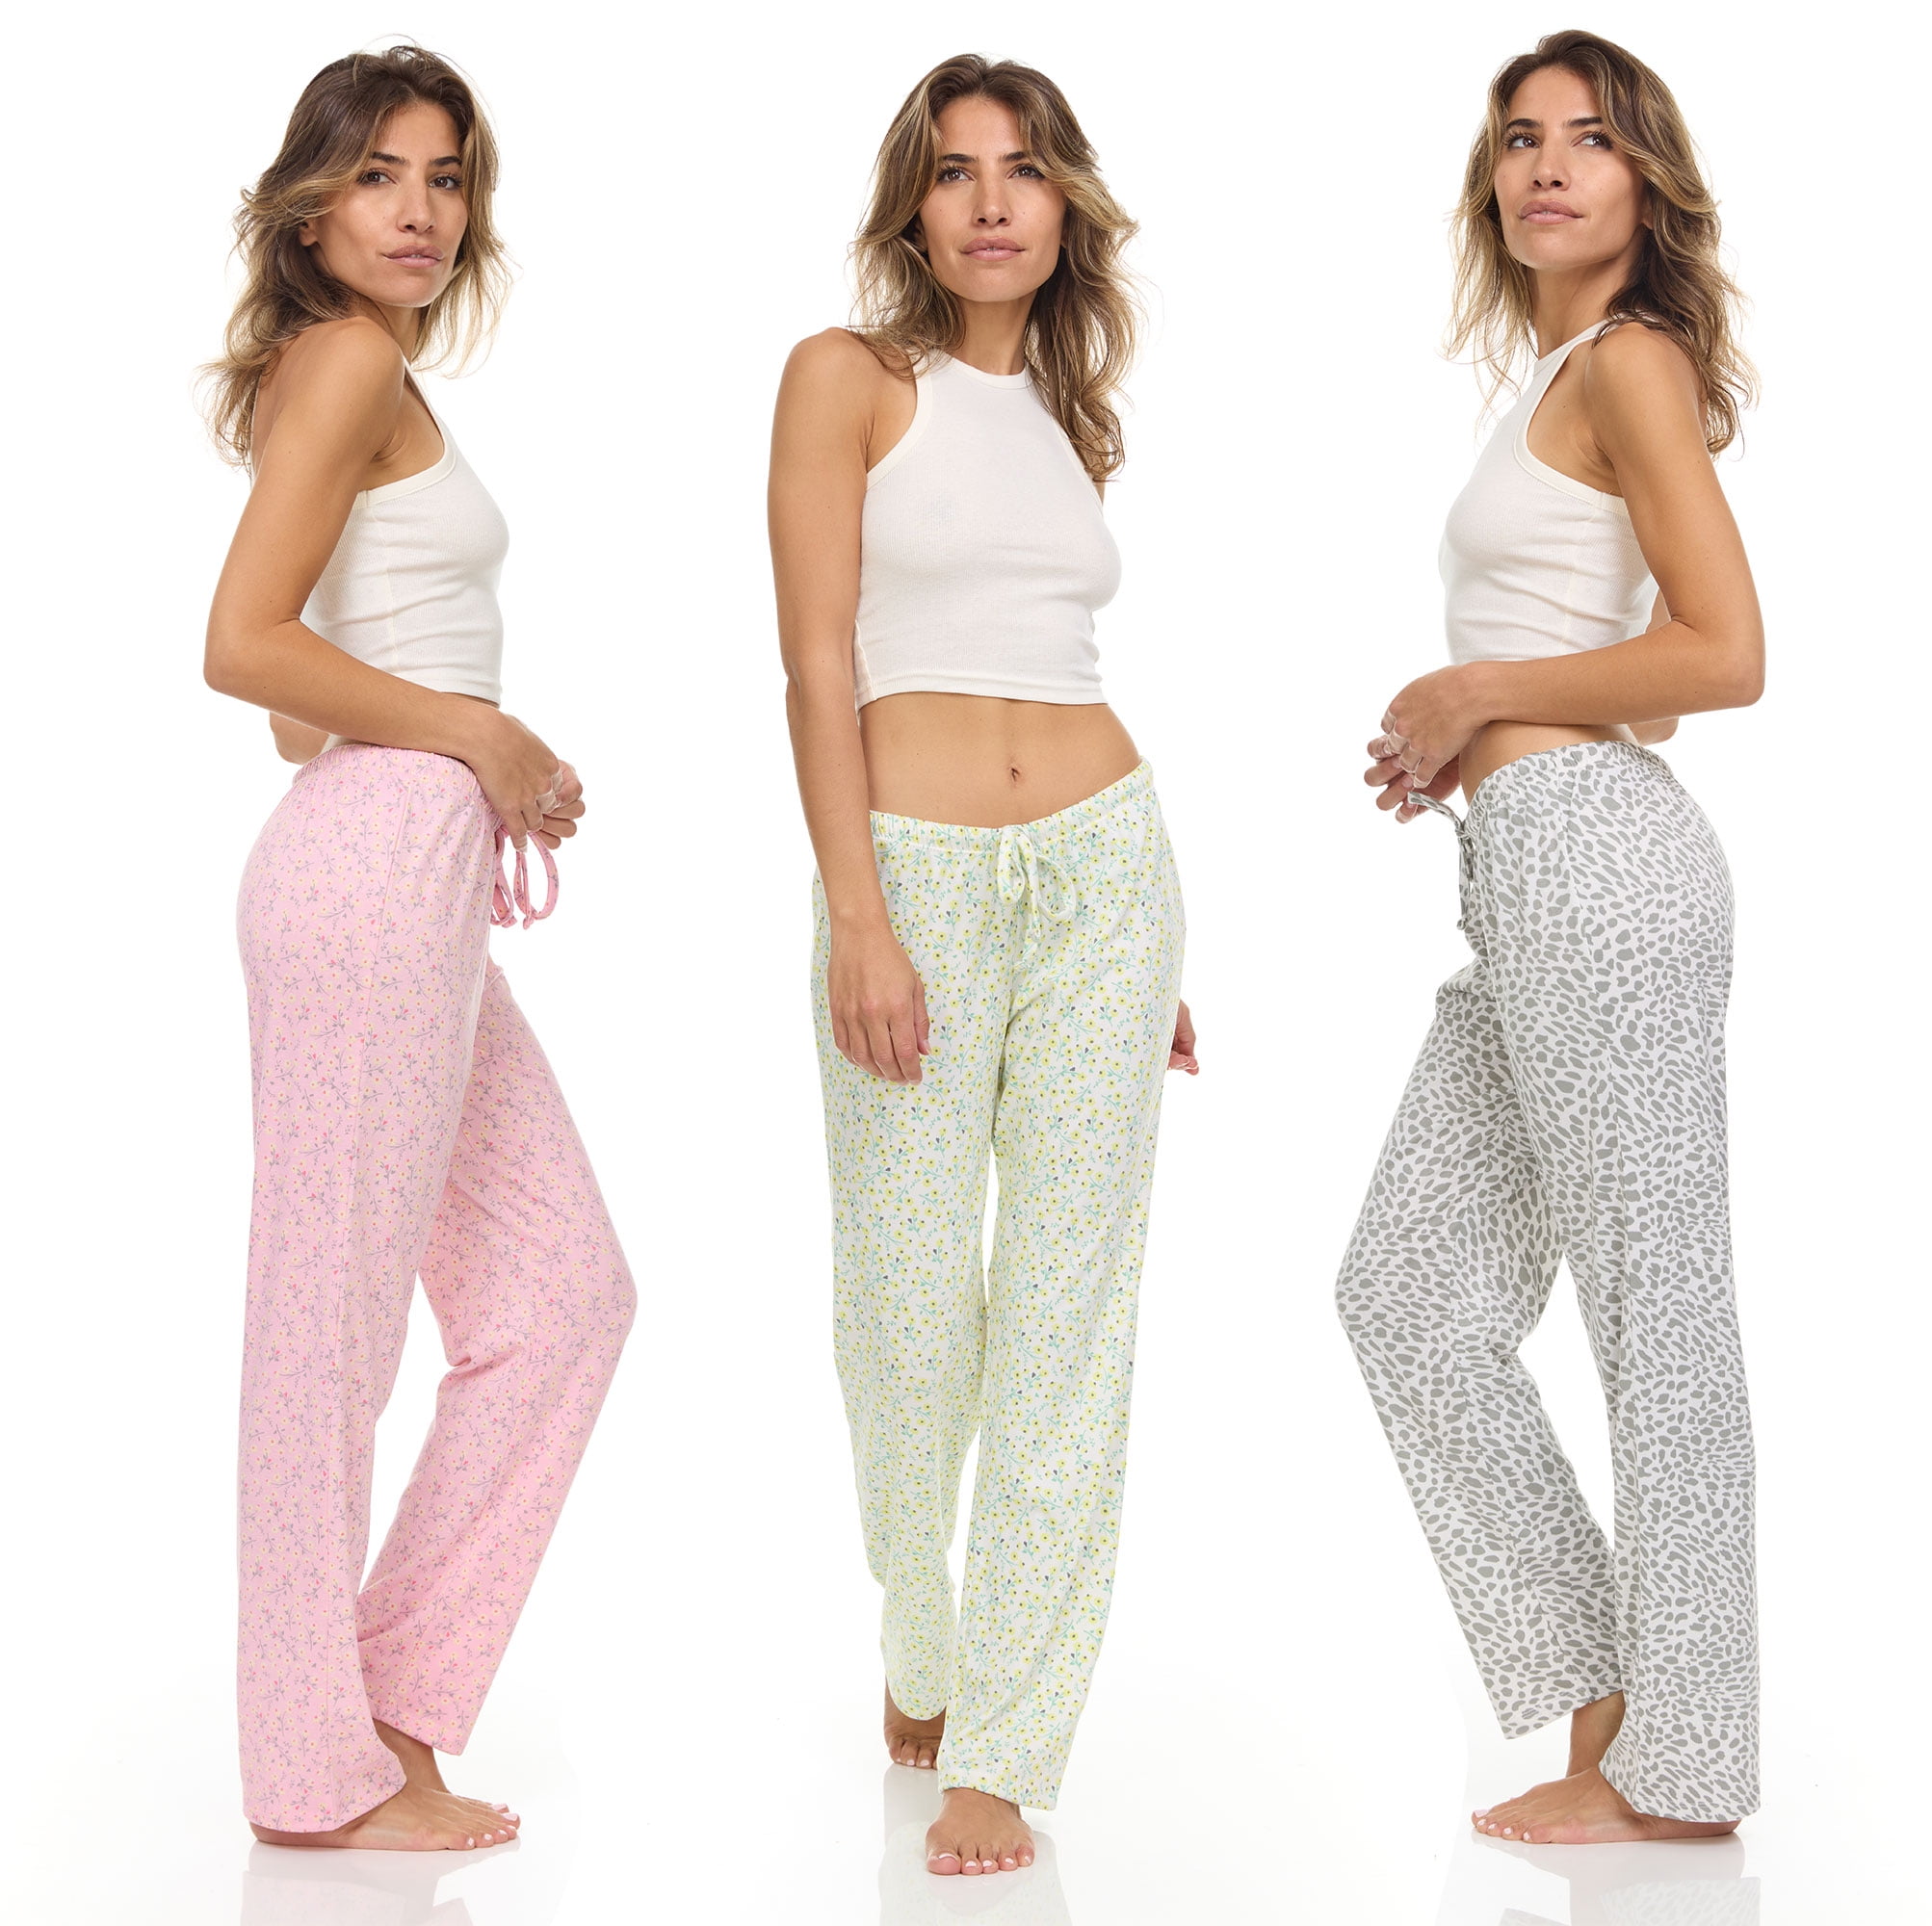 Picture of Daresay PJW-200-SET E-Yum Pnt-3Pk-L Womens Printed Lounge Pajama Pants, Assorted Color - Large - Pack of 3